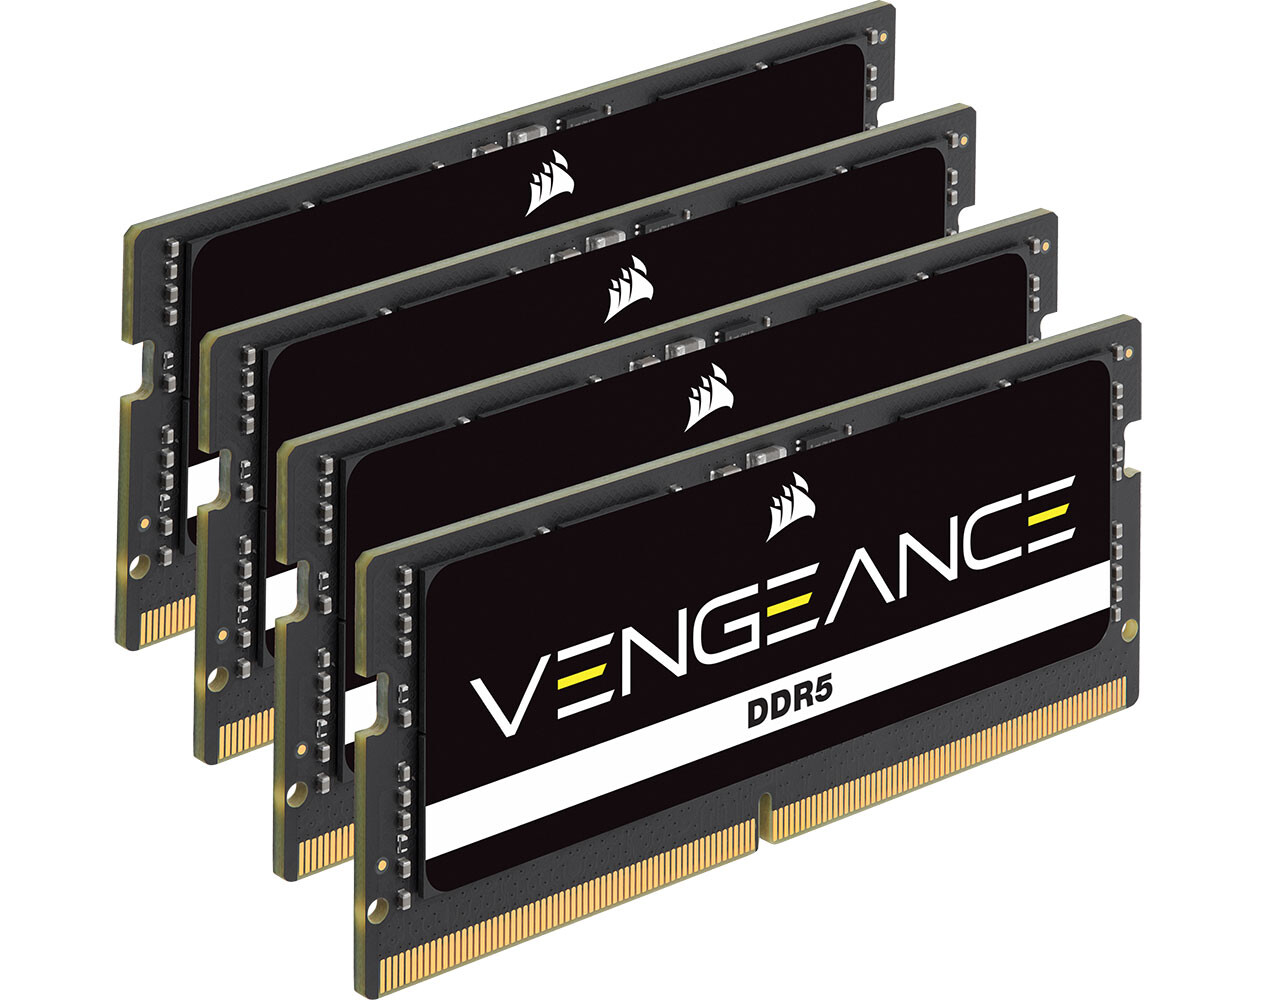 CORSAIR Vengeance DDR5 SODIMM Memory Kits Launched -